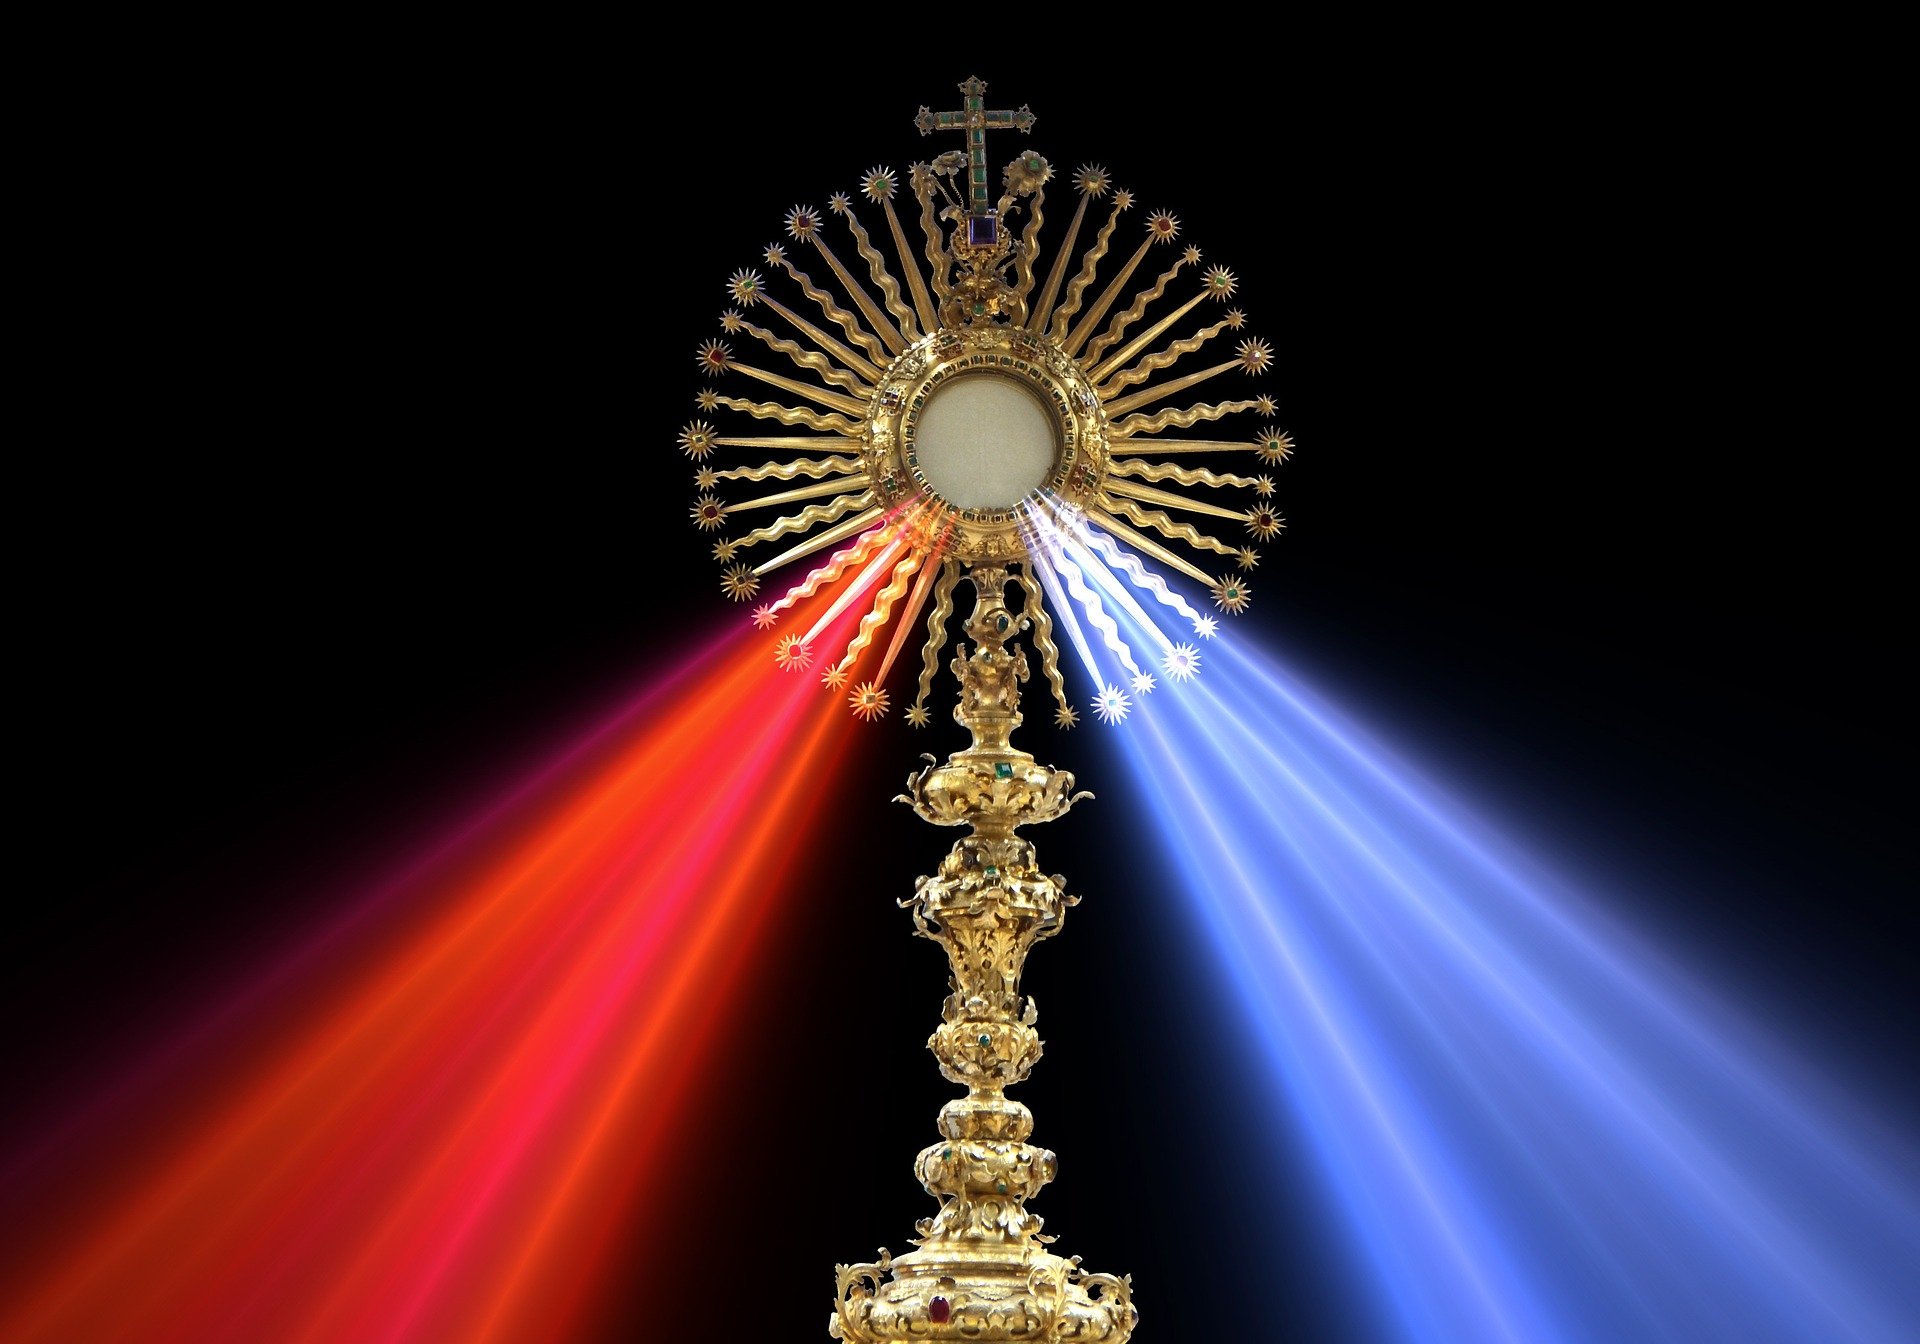 A photo showing the Divine Mercy monstrance